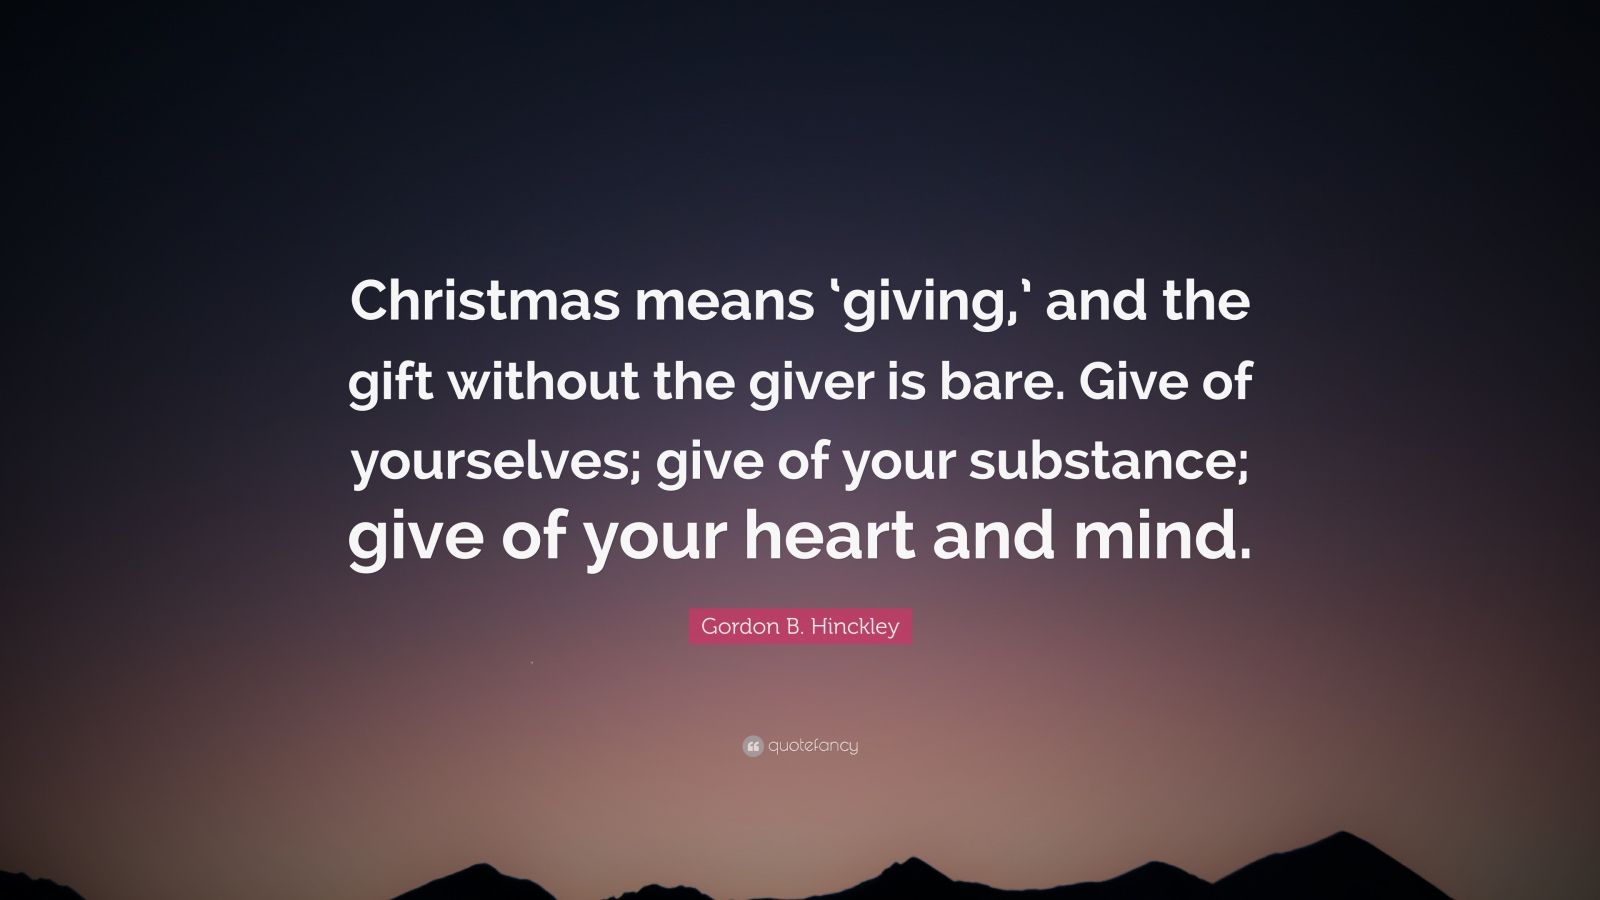 Gordon B. Hinckley Quote: “Christmas means ‘giving,’ and the gift